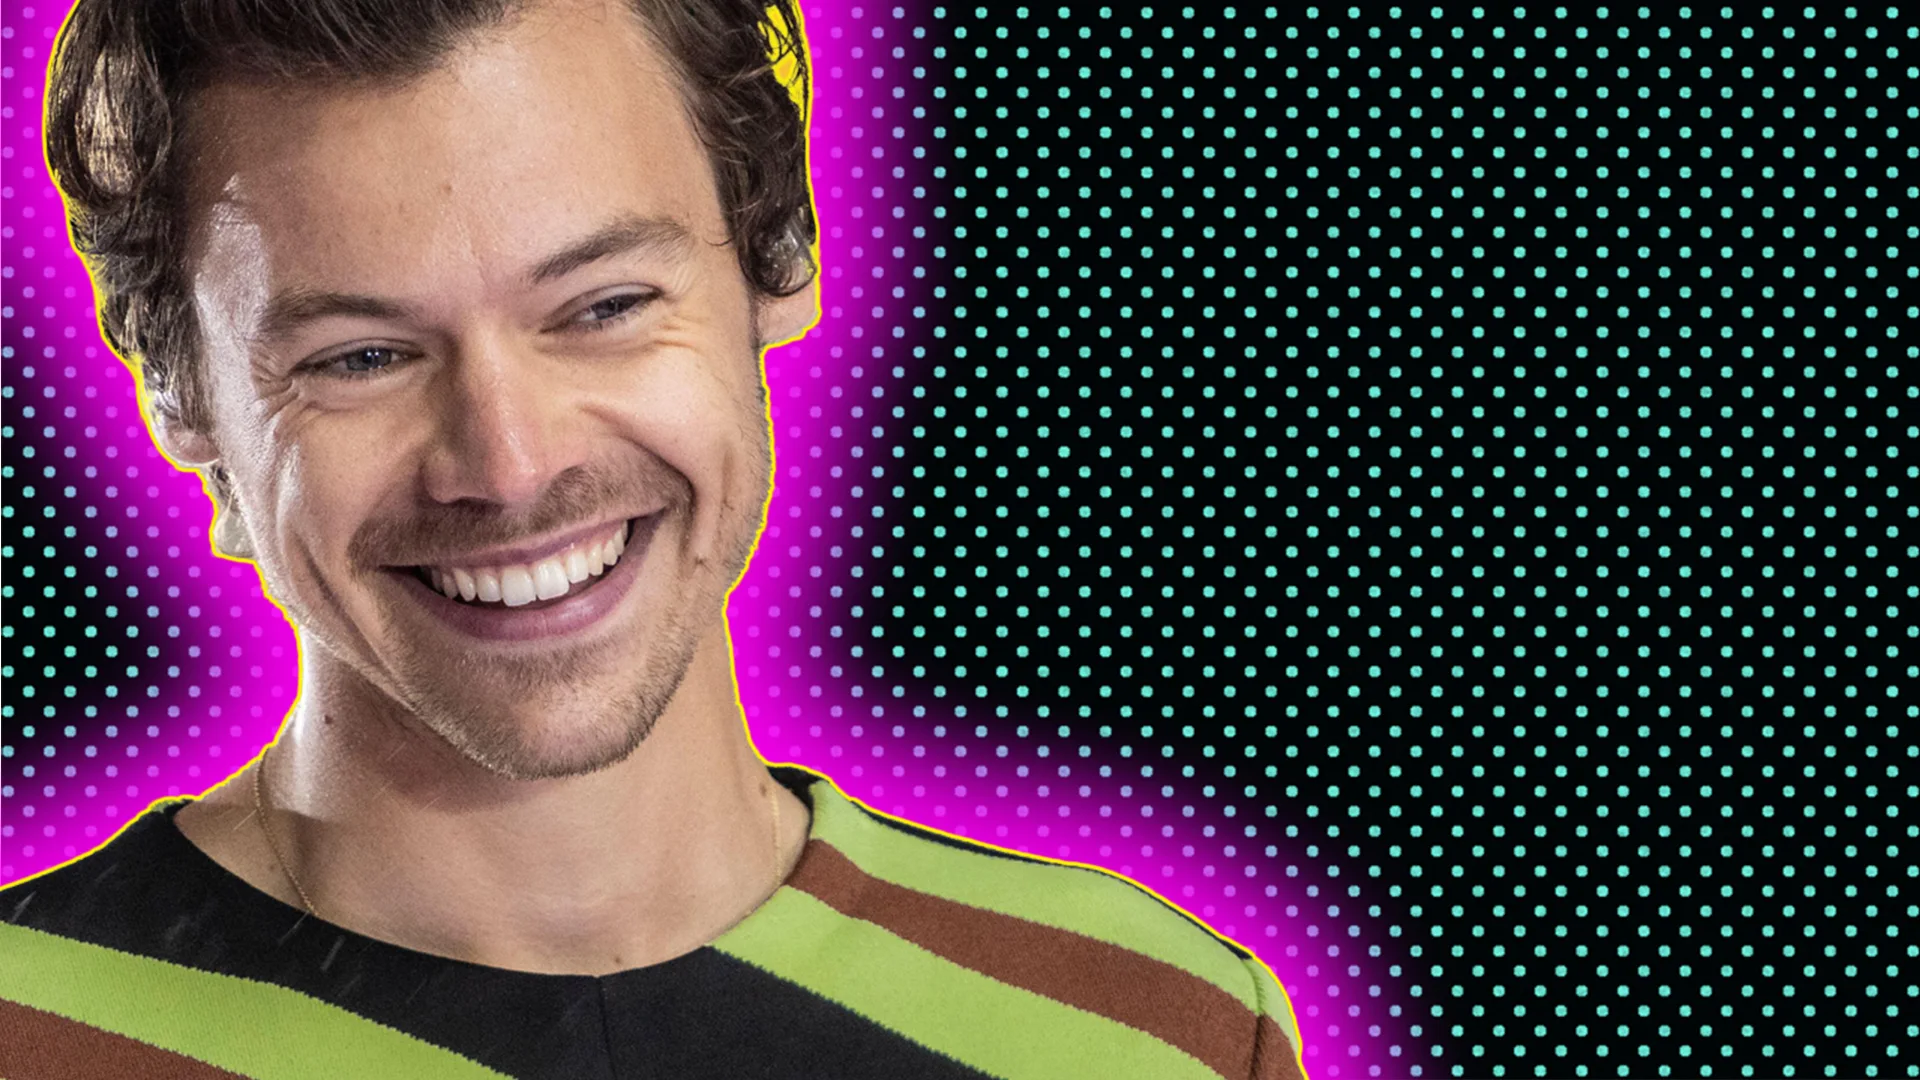 Harry Styles smiling with a purple glow around him on a black background with green polka dots